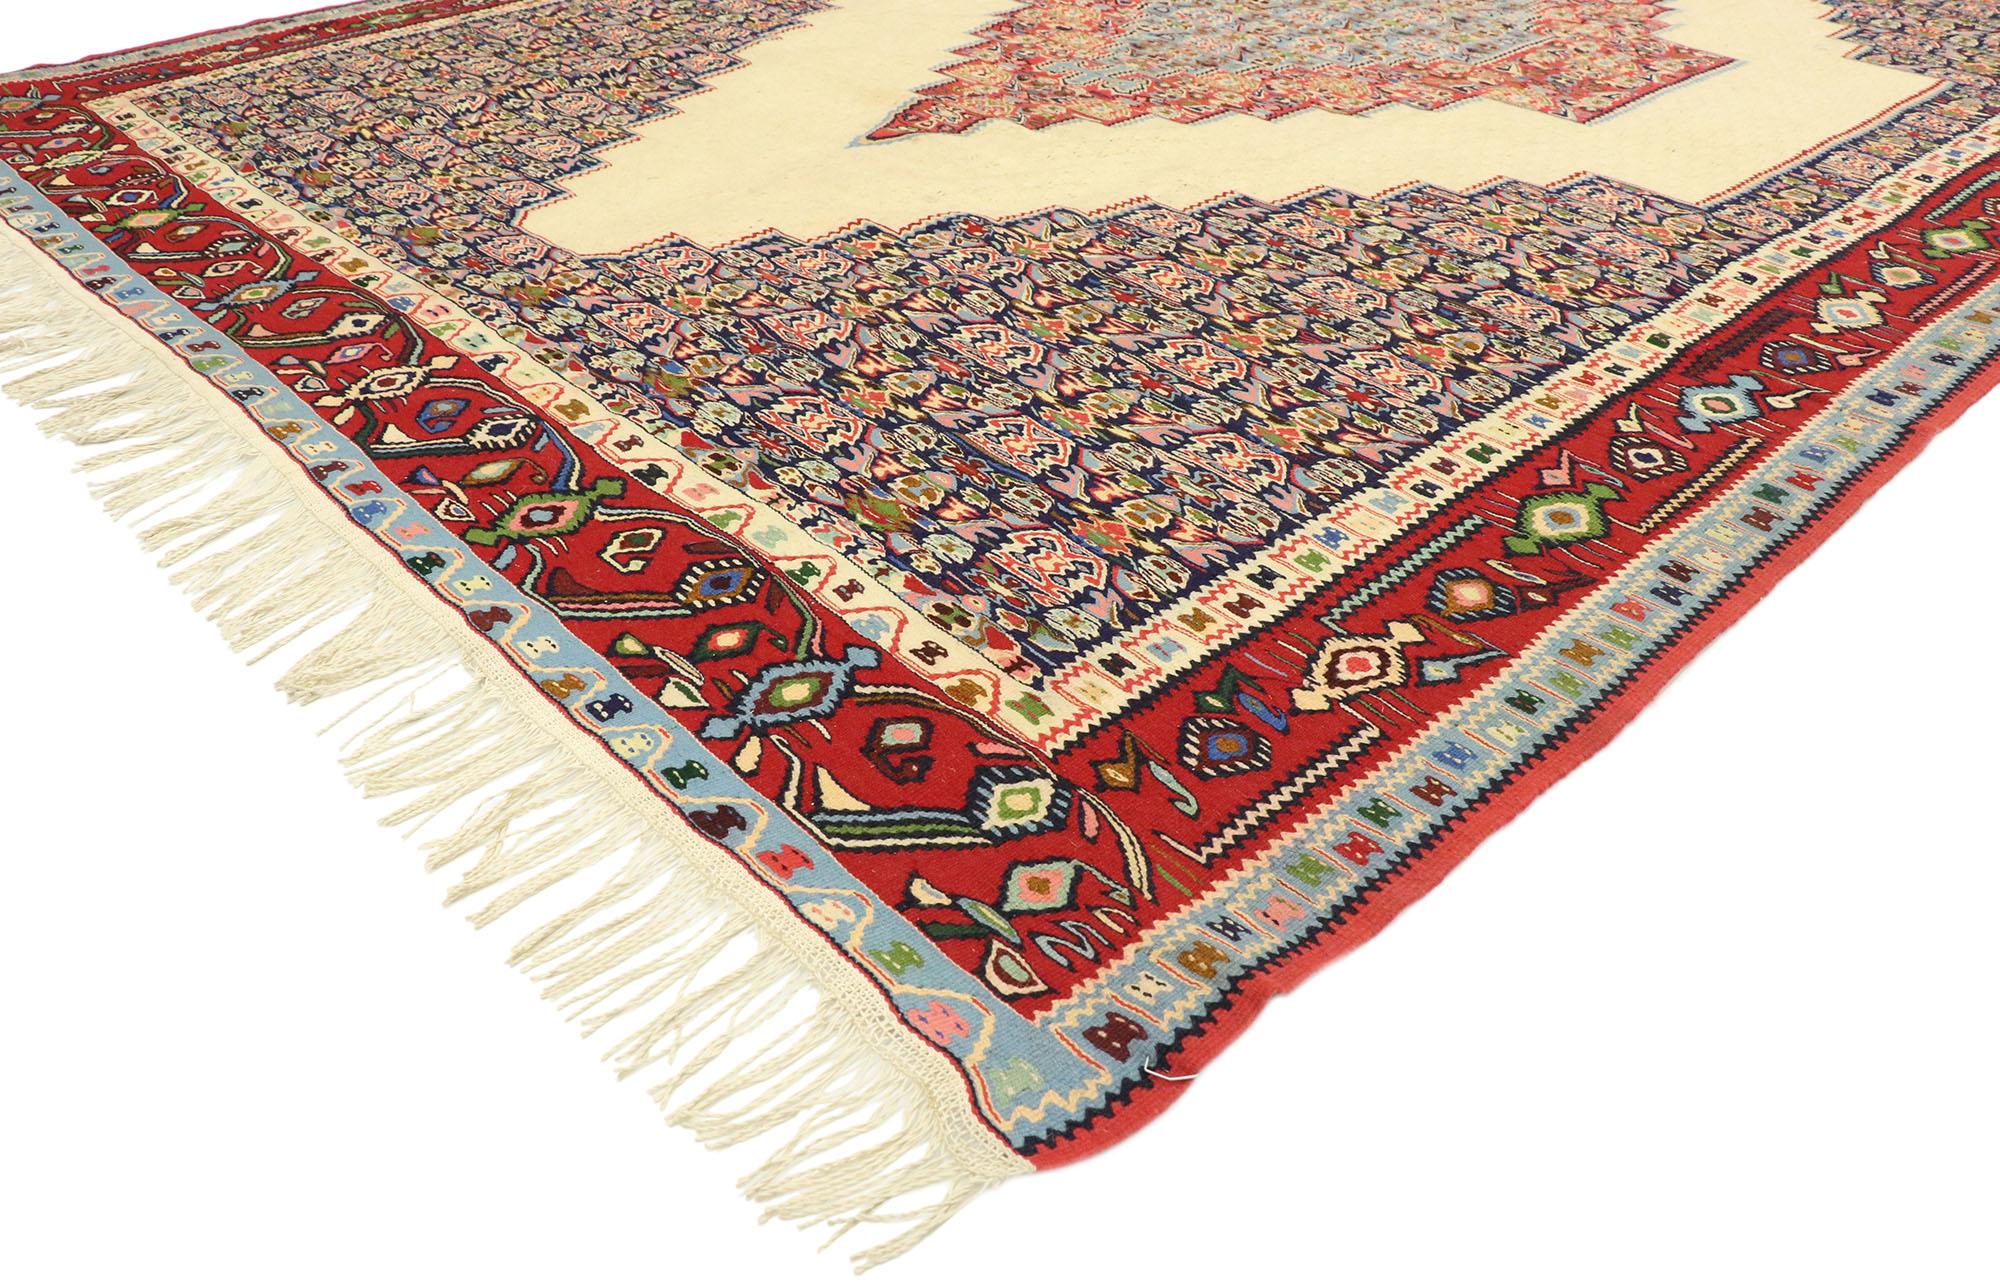 71845, vintage Persian Kilim rug with Modern Rustic tribal Adirondacks Lodge style. Down-to-earth vibes and rustic sensibility meet Adirondack lodge style in this handwoven wool vintage Persian Kilim rug. It features a stepped lozenge concentric